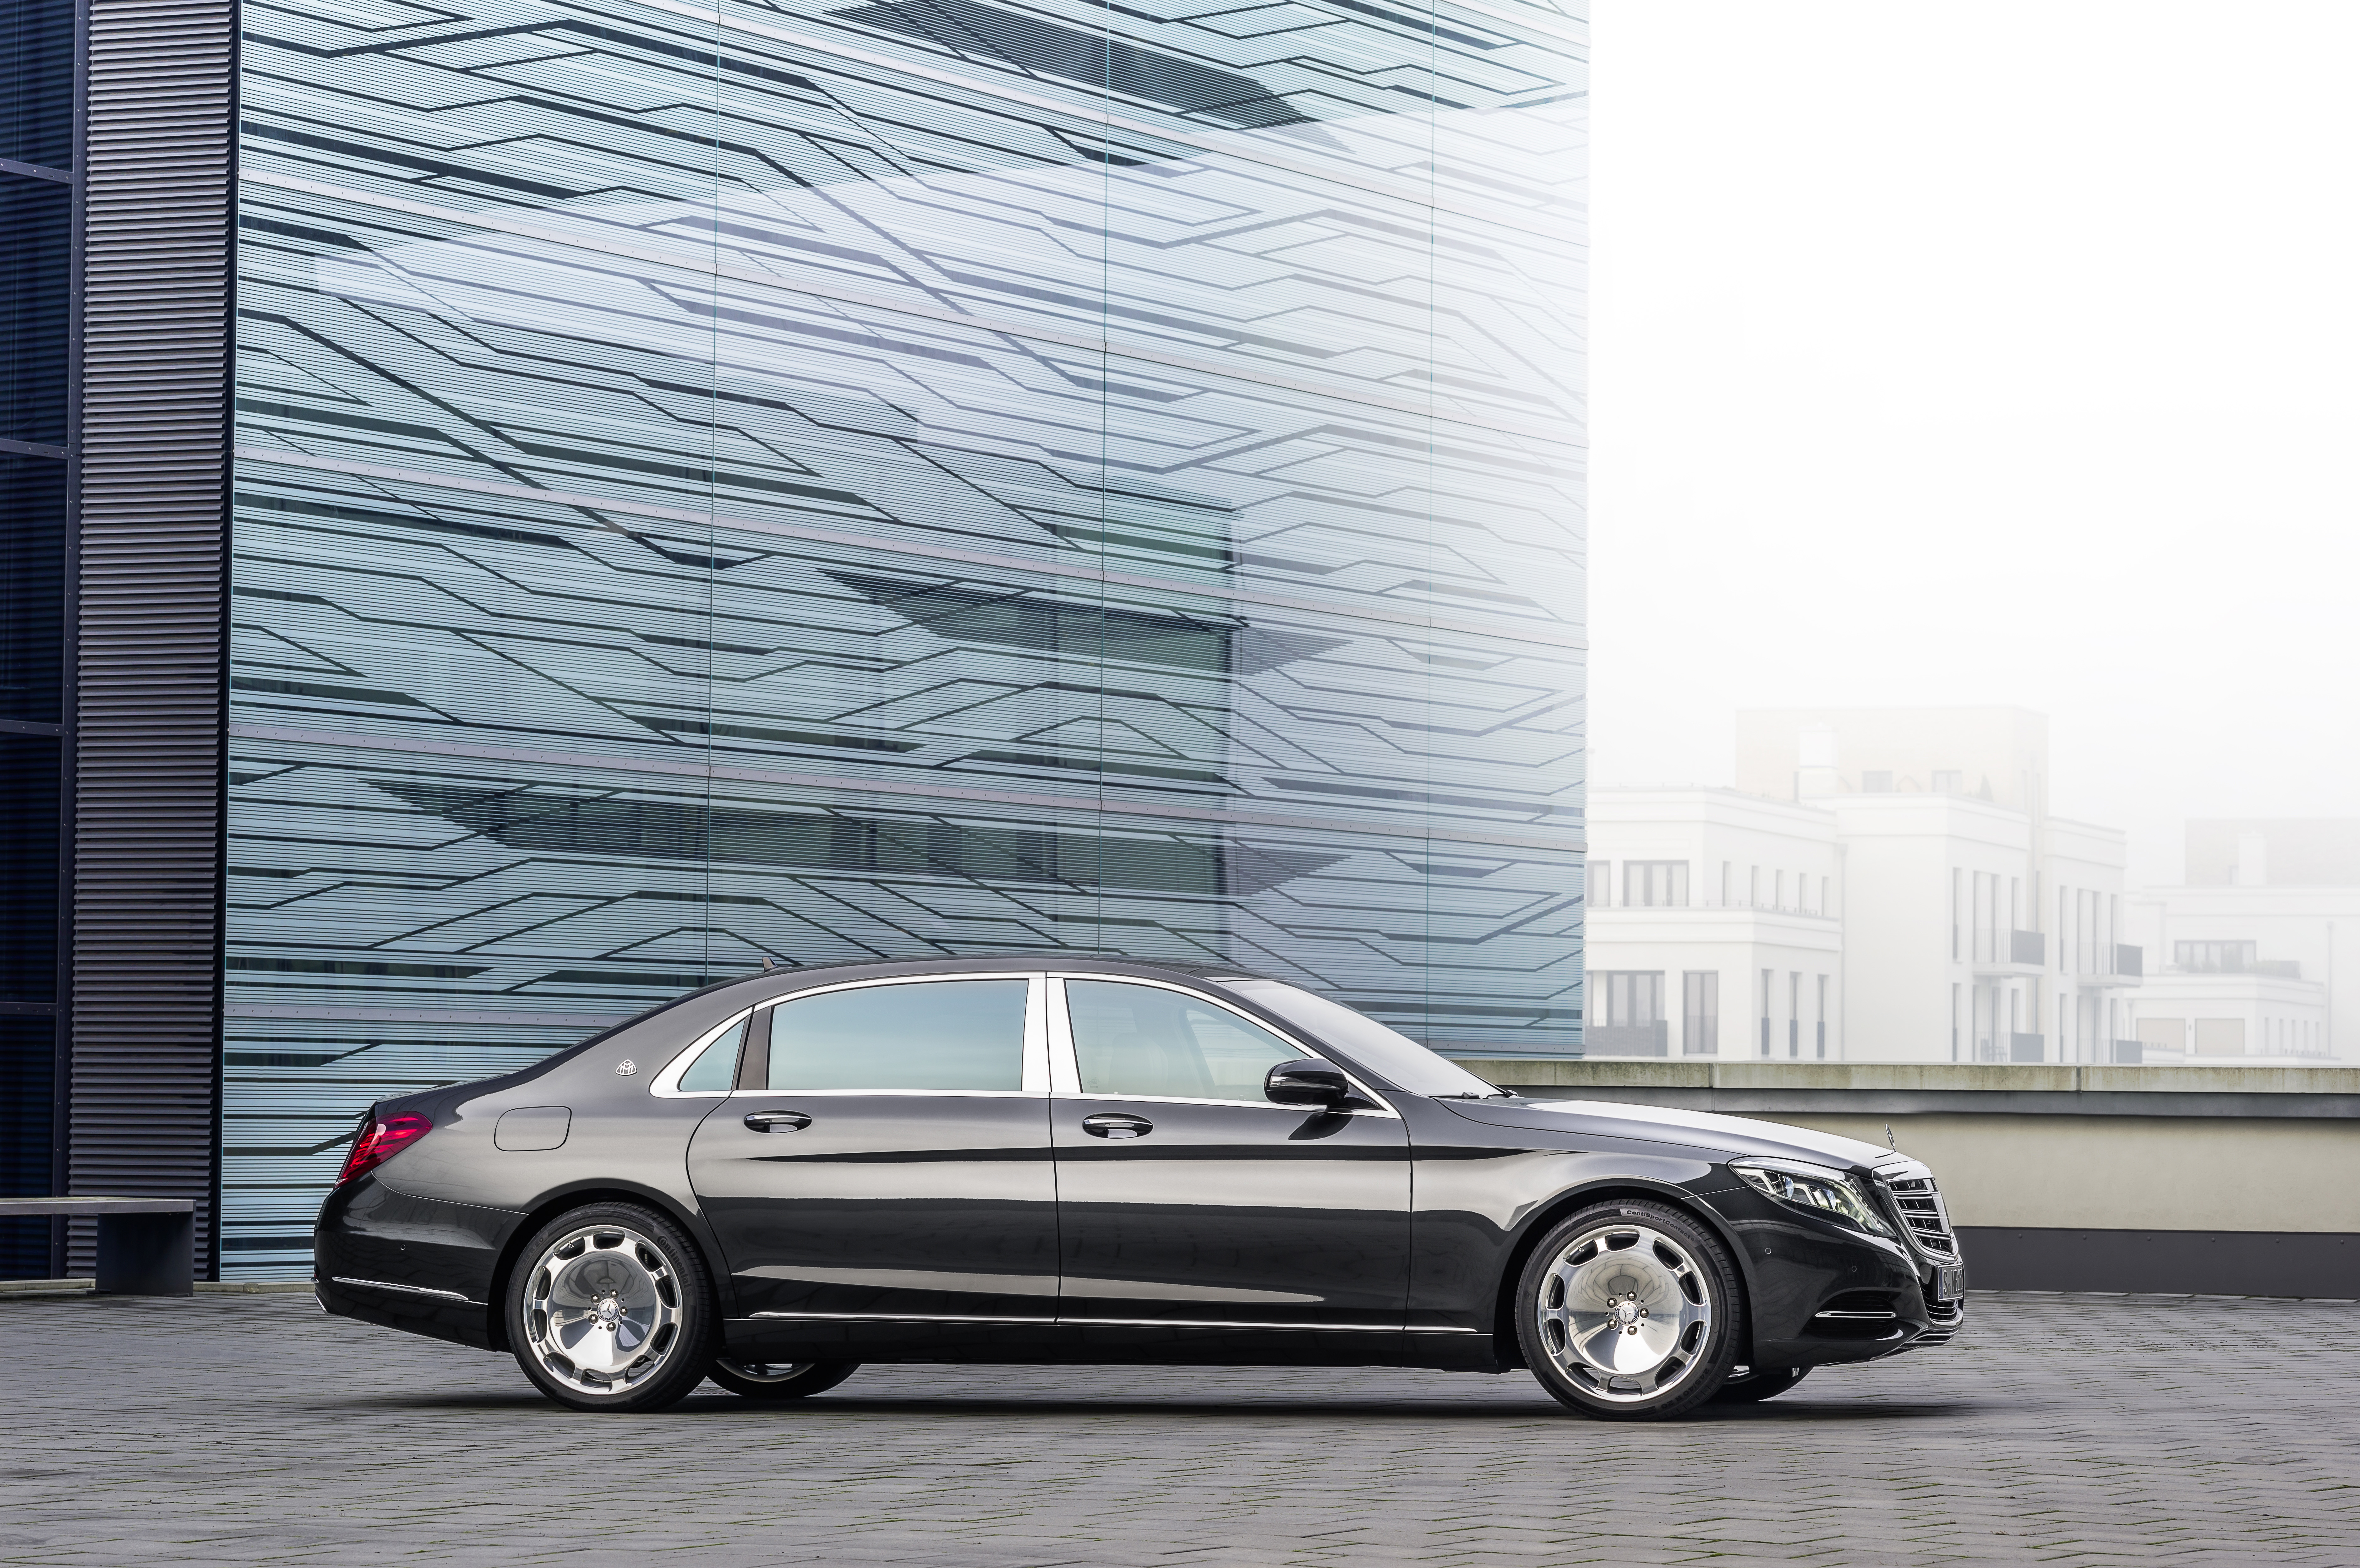 Мерседес s600. Mercedes-Benz x222 s600 Maybach. Мерседес Бенц Майбах s600. Mercedes Benz s600 222. Мерседес Майбах седан.